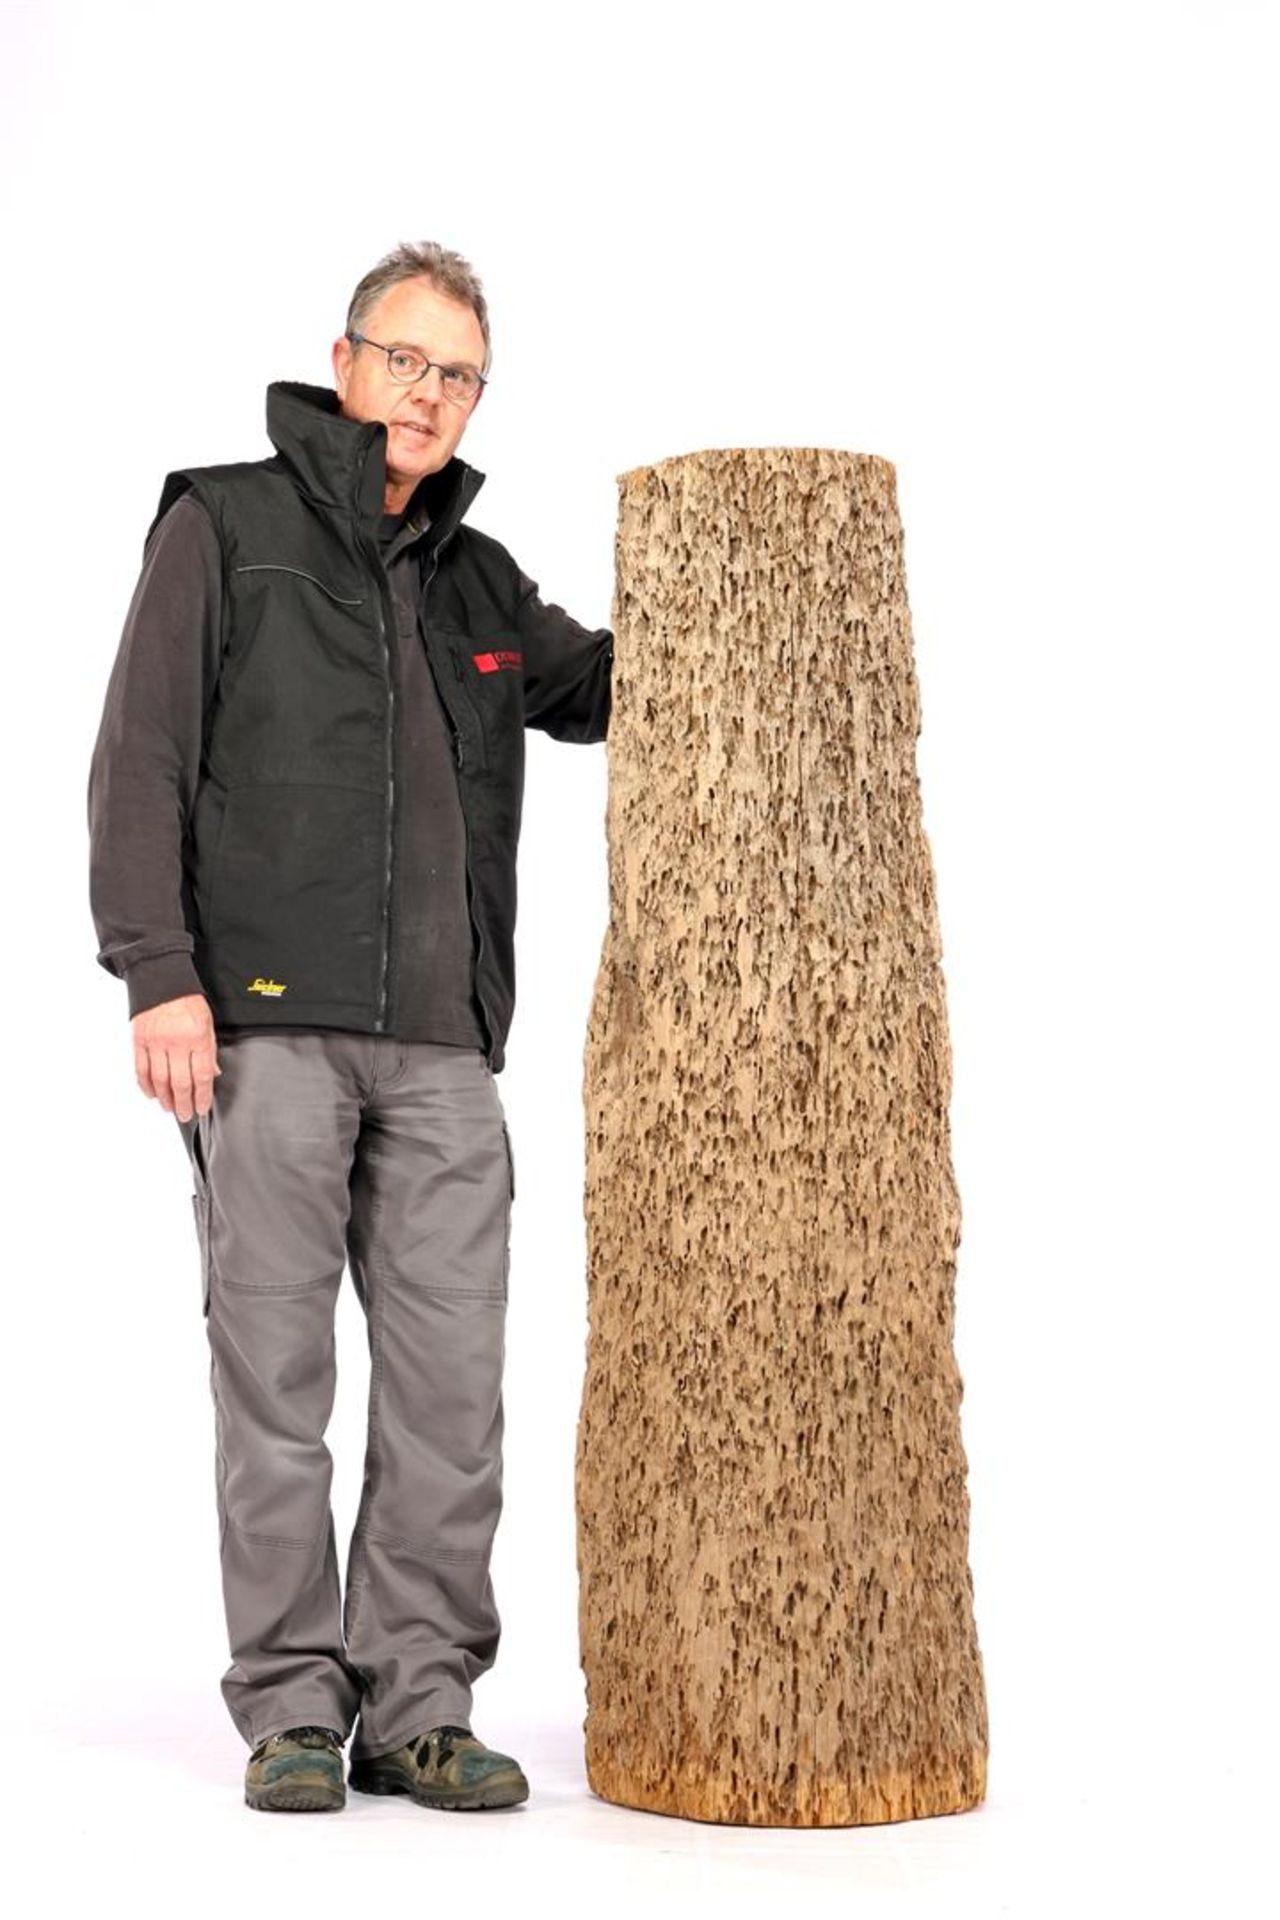 Wooden mussel pole, 152 cm high and 30-40 cm in diameter